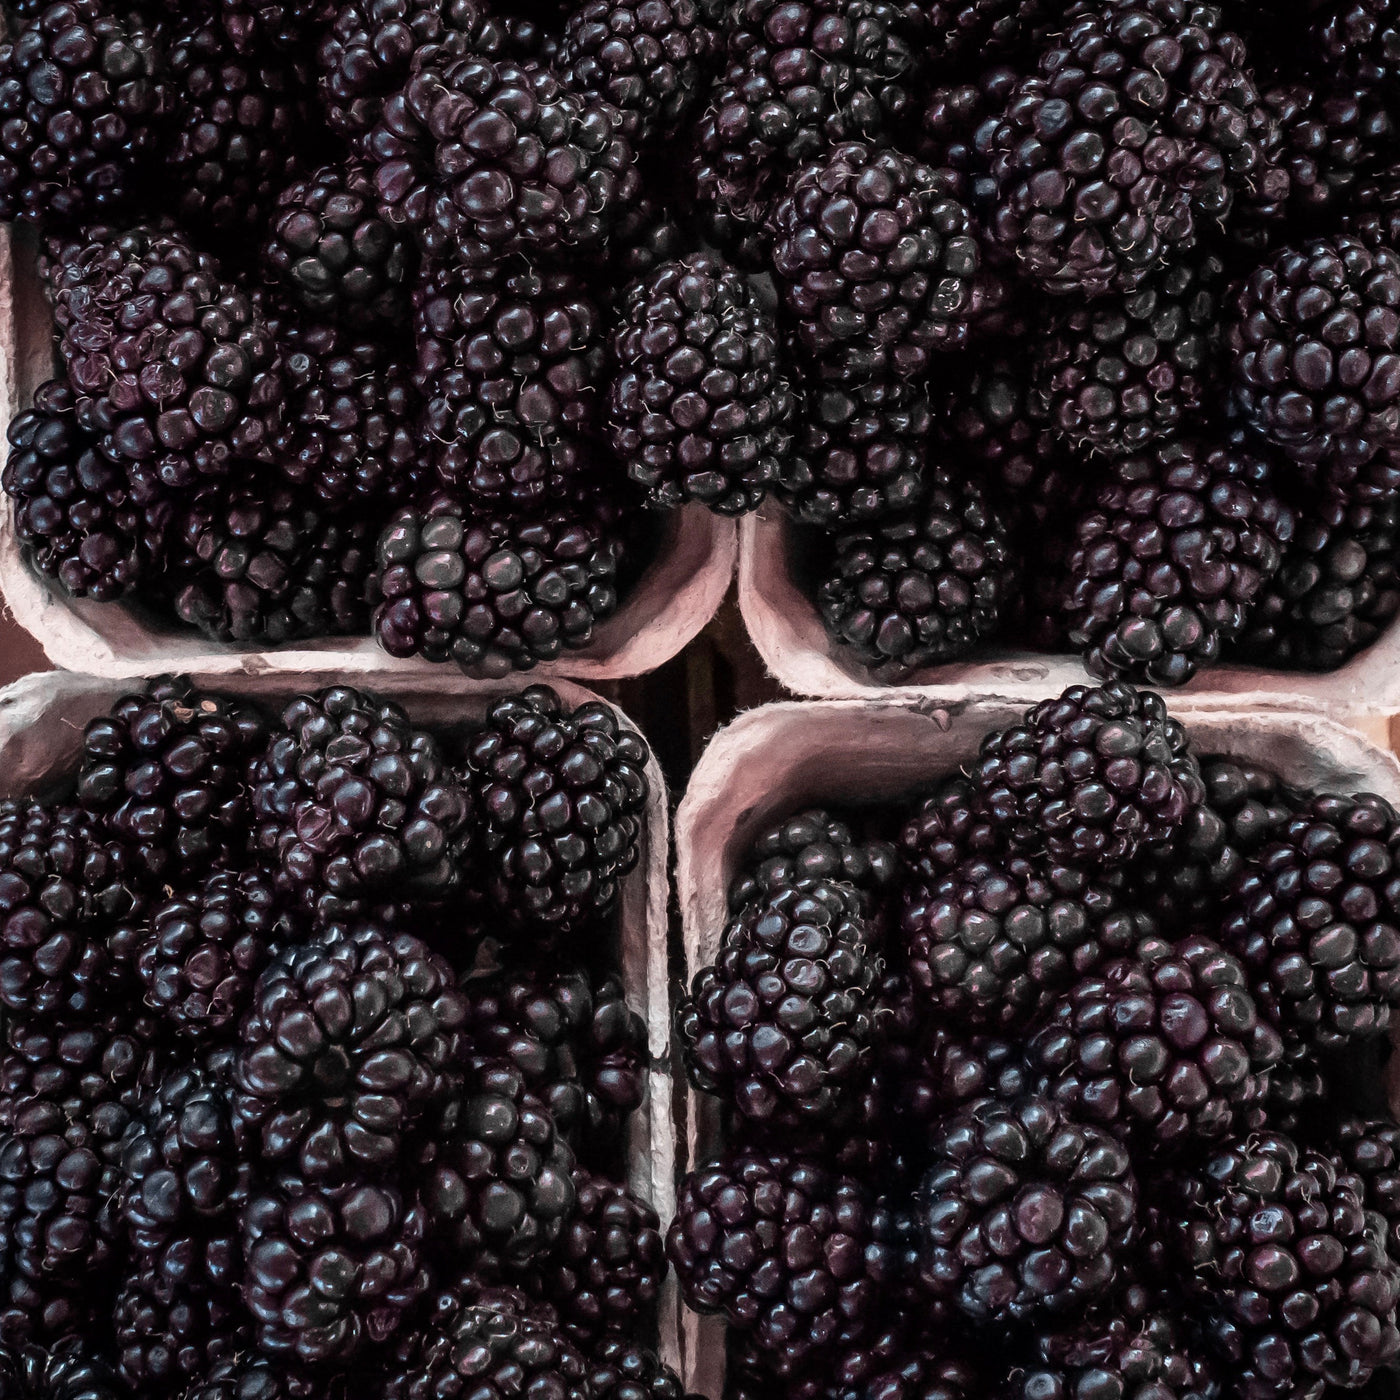 Shop Blackberries online in Singapore - The New Grocer